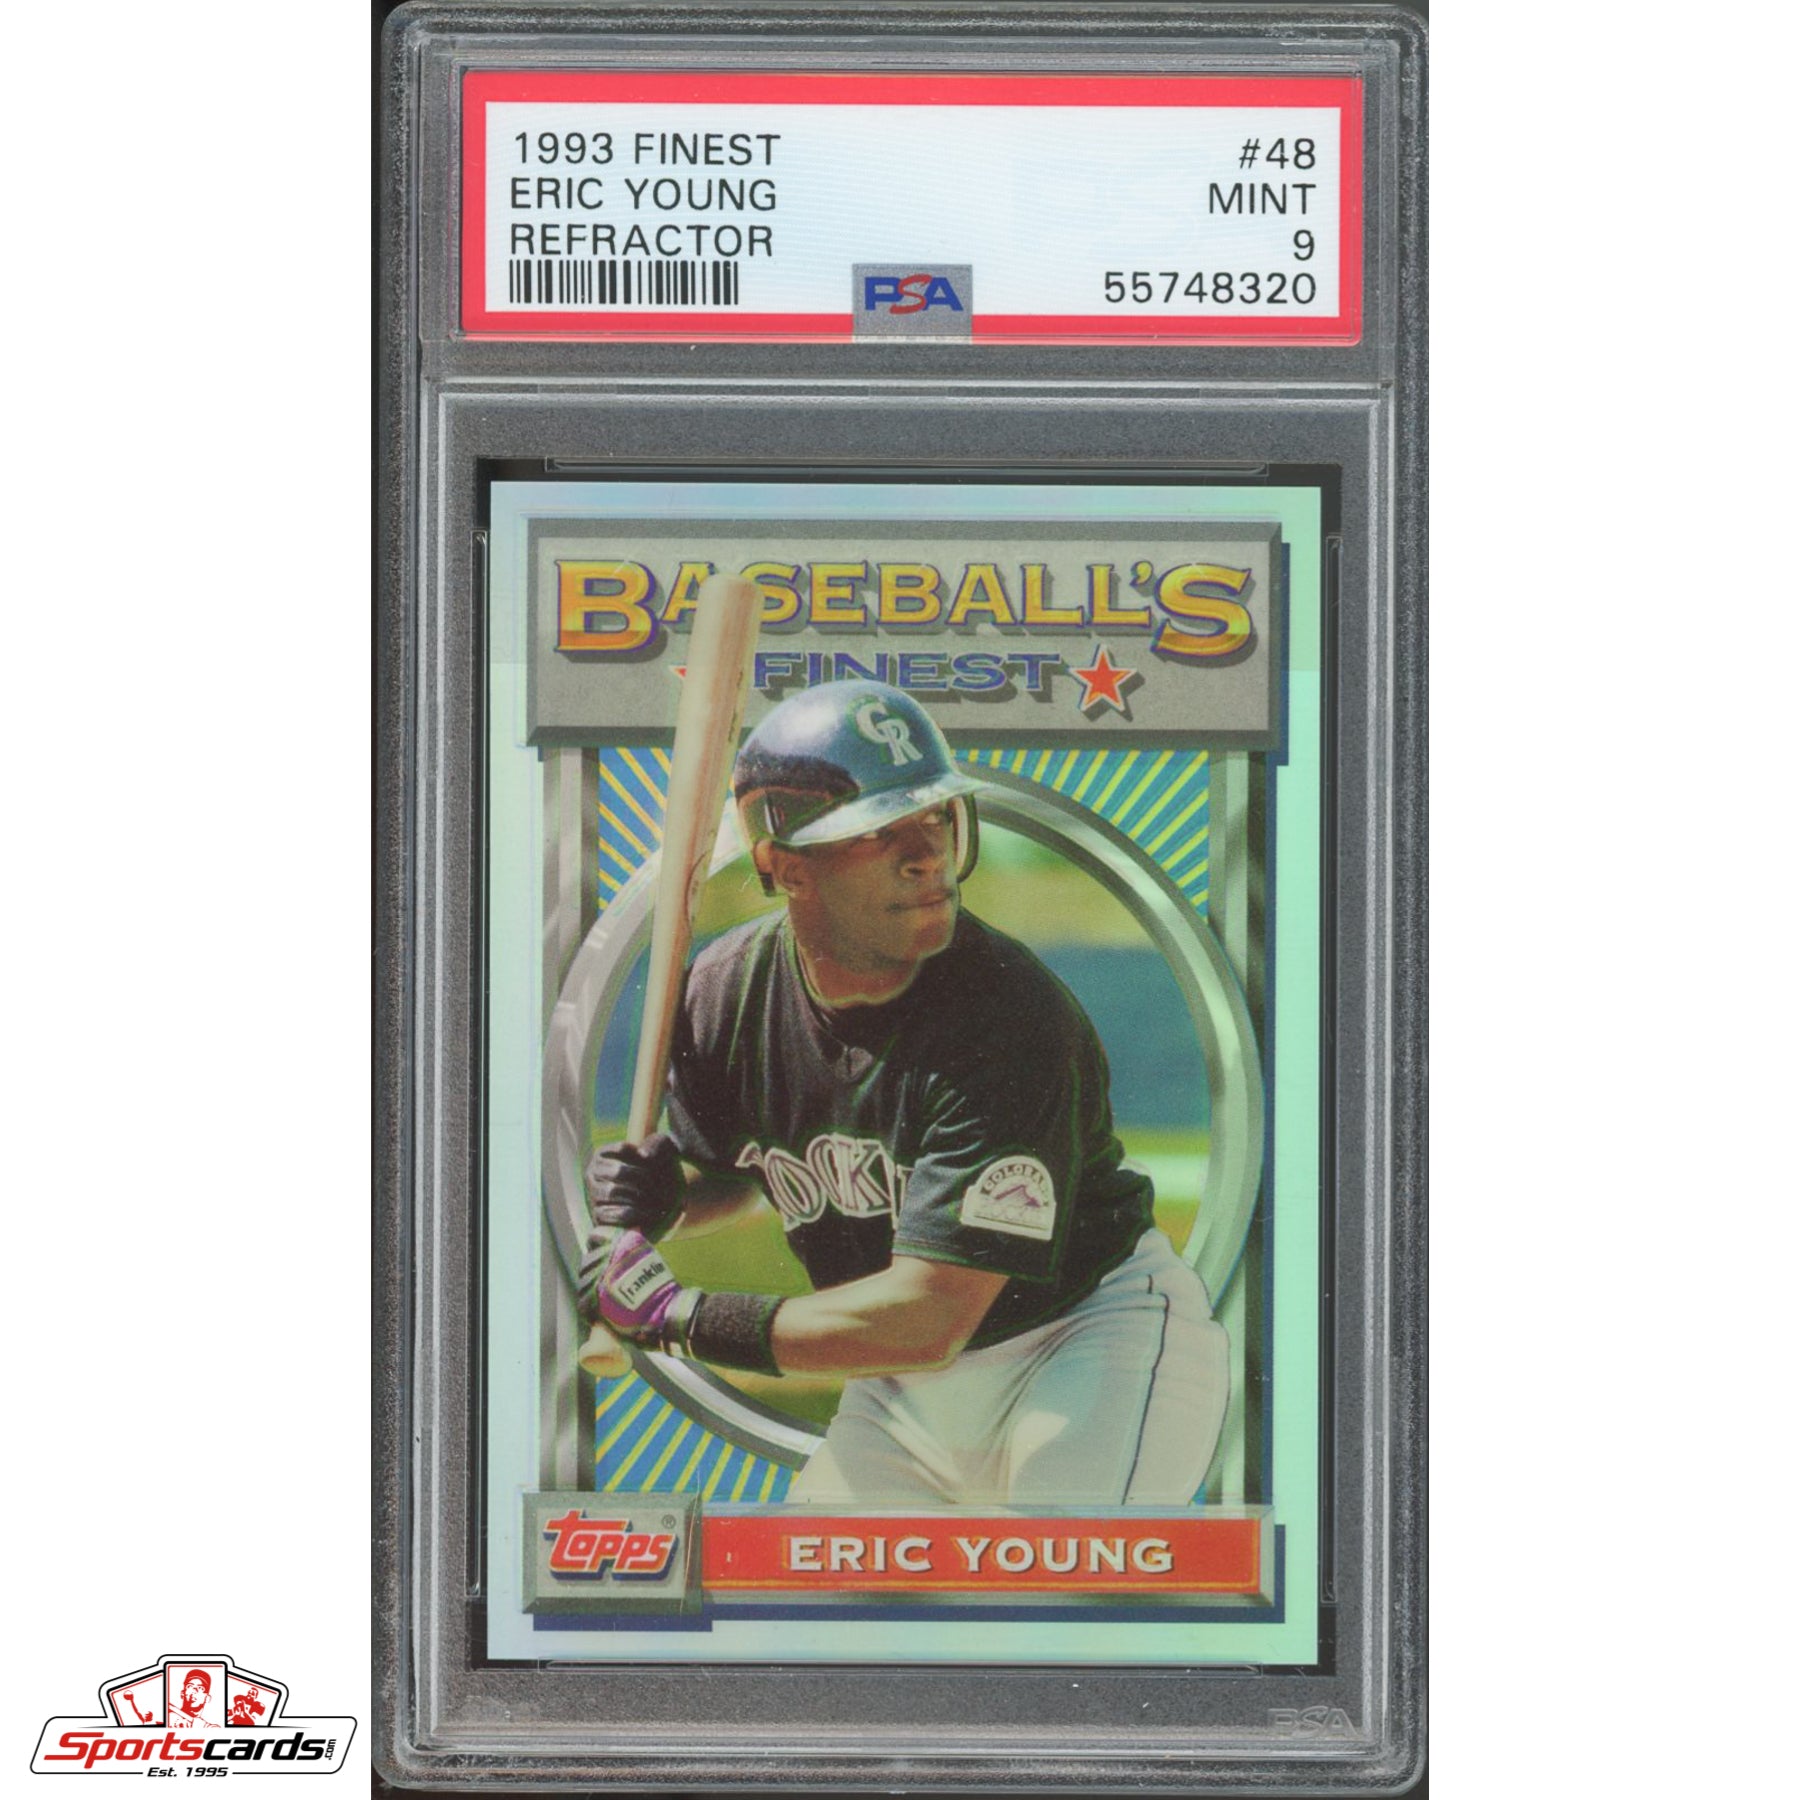 1993 Finest Eric Young Refractor #48 PSA 9